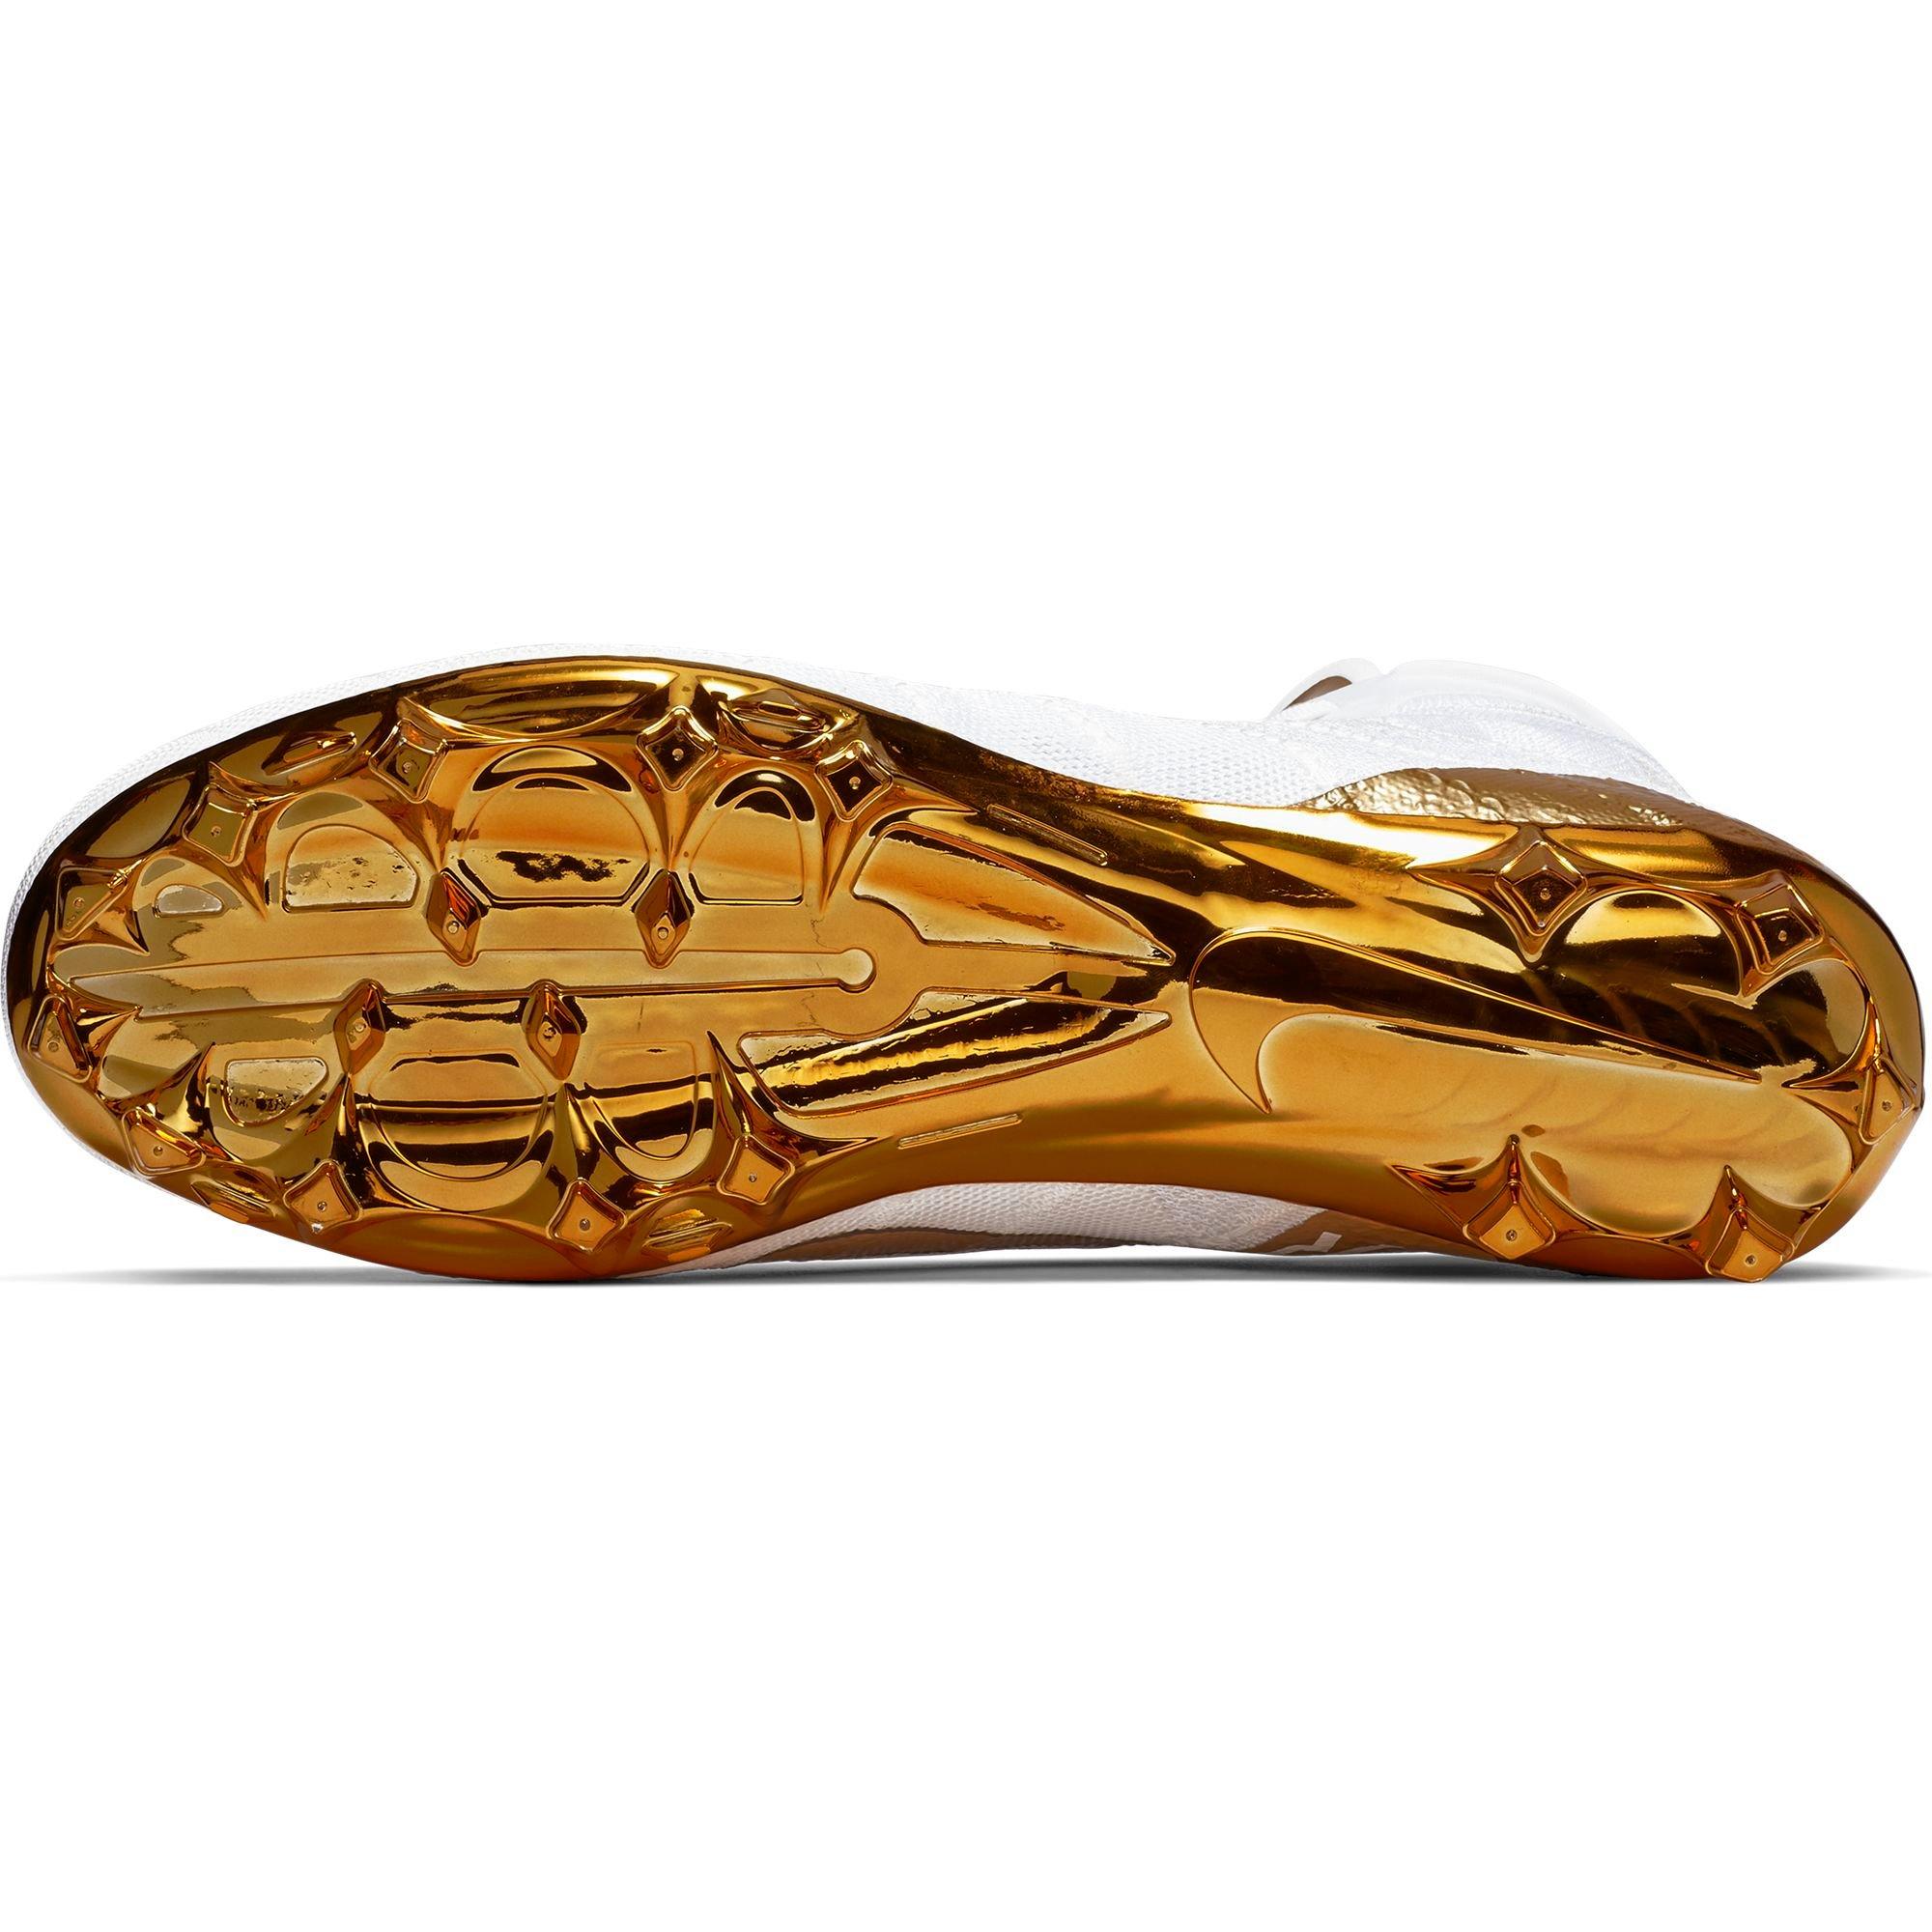 nike gold bottom cleats